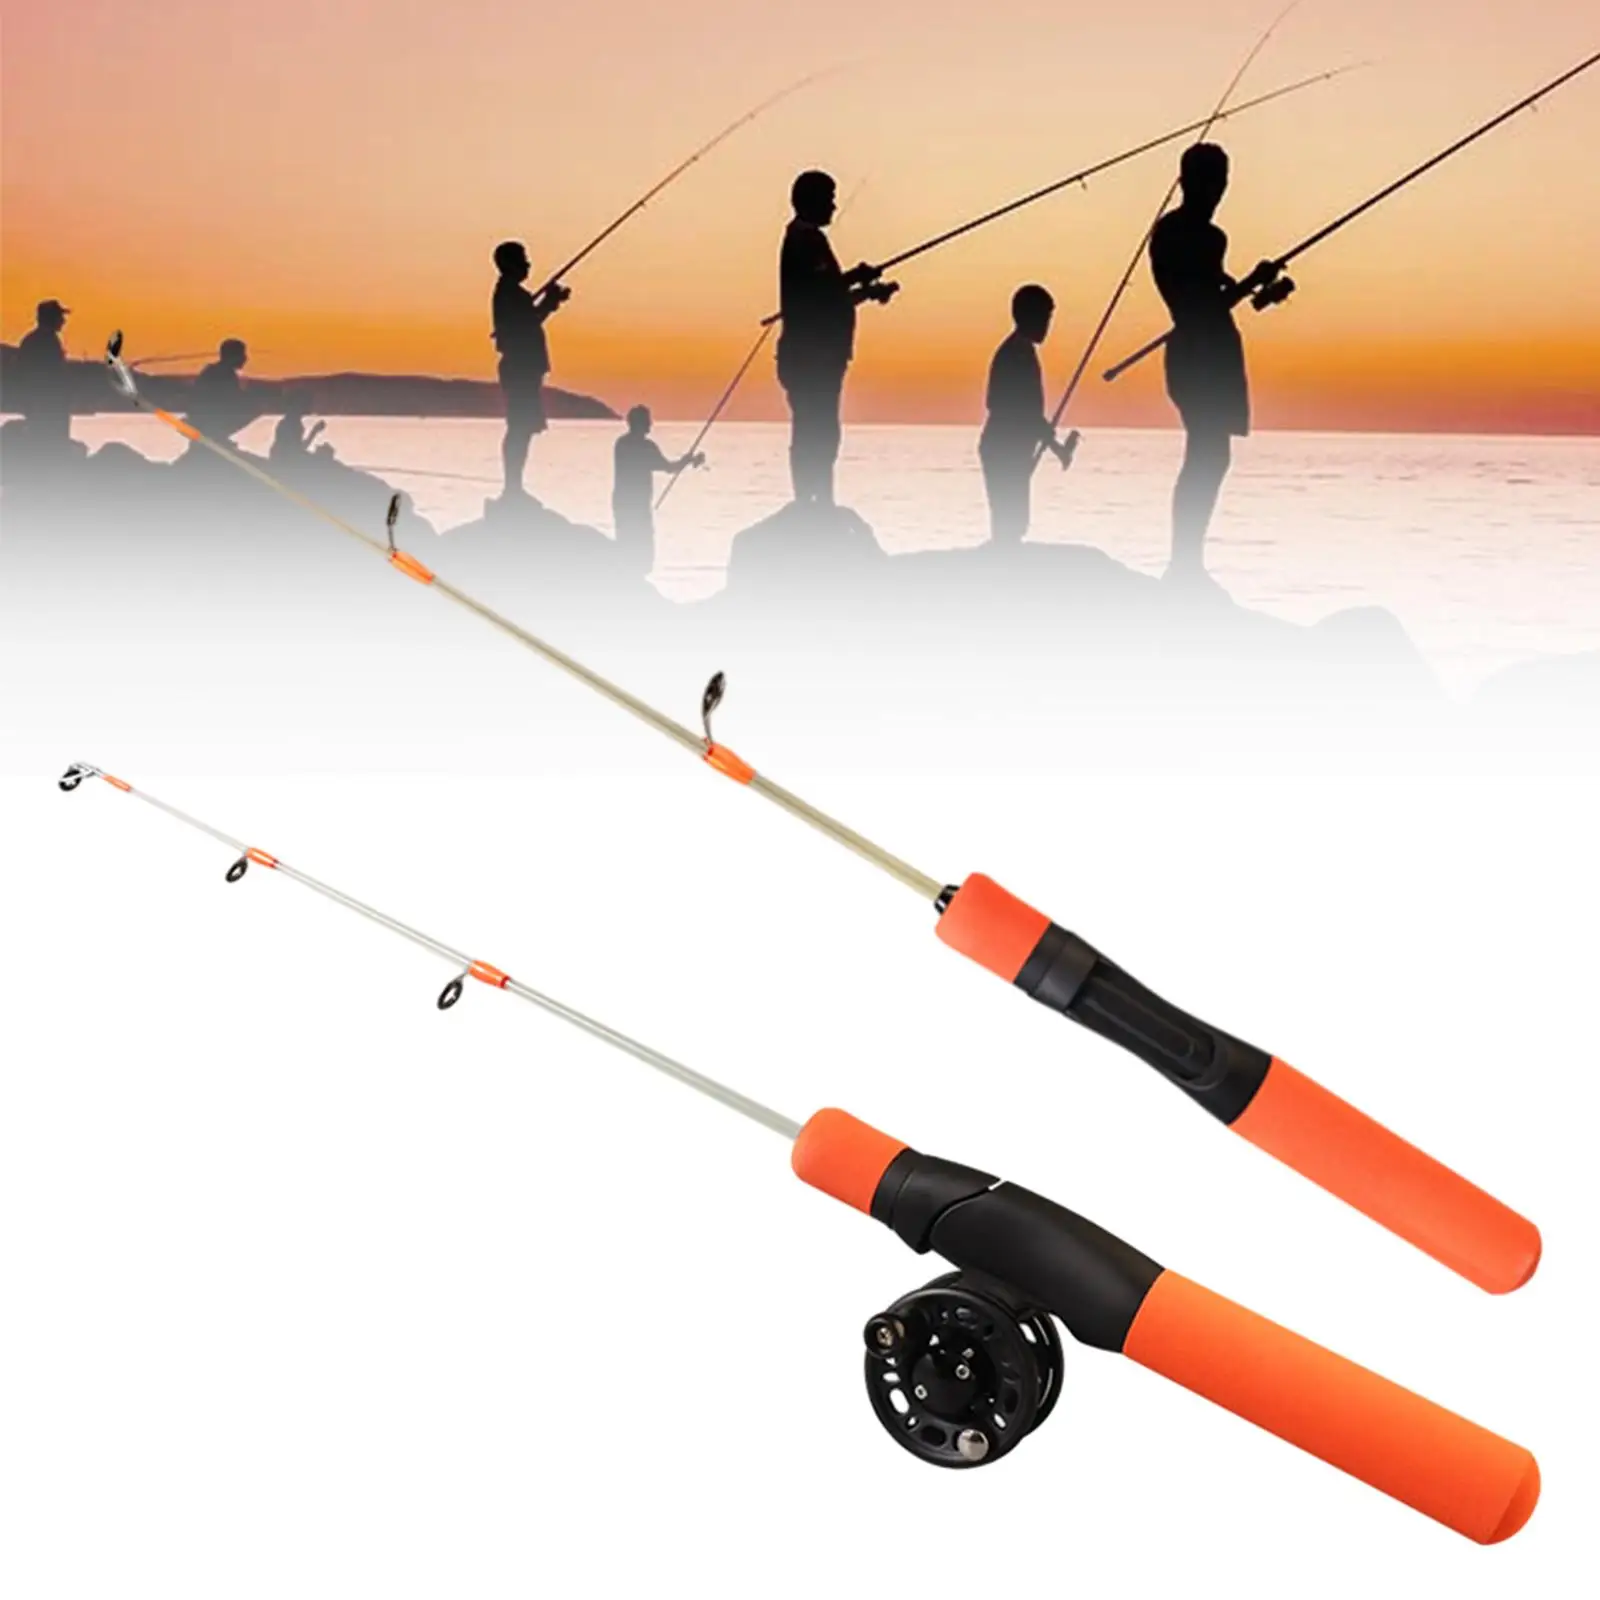 Ice Fishing Pole Lightweight Fishing Gear Glass Fiber Easy to Carry Fishing Tool Fishing Tackle for Reservoir Lake Fishing